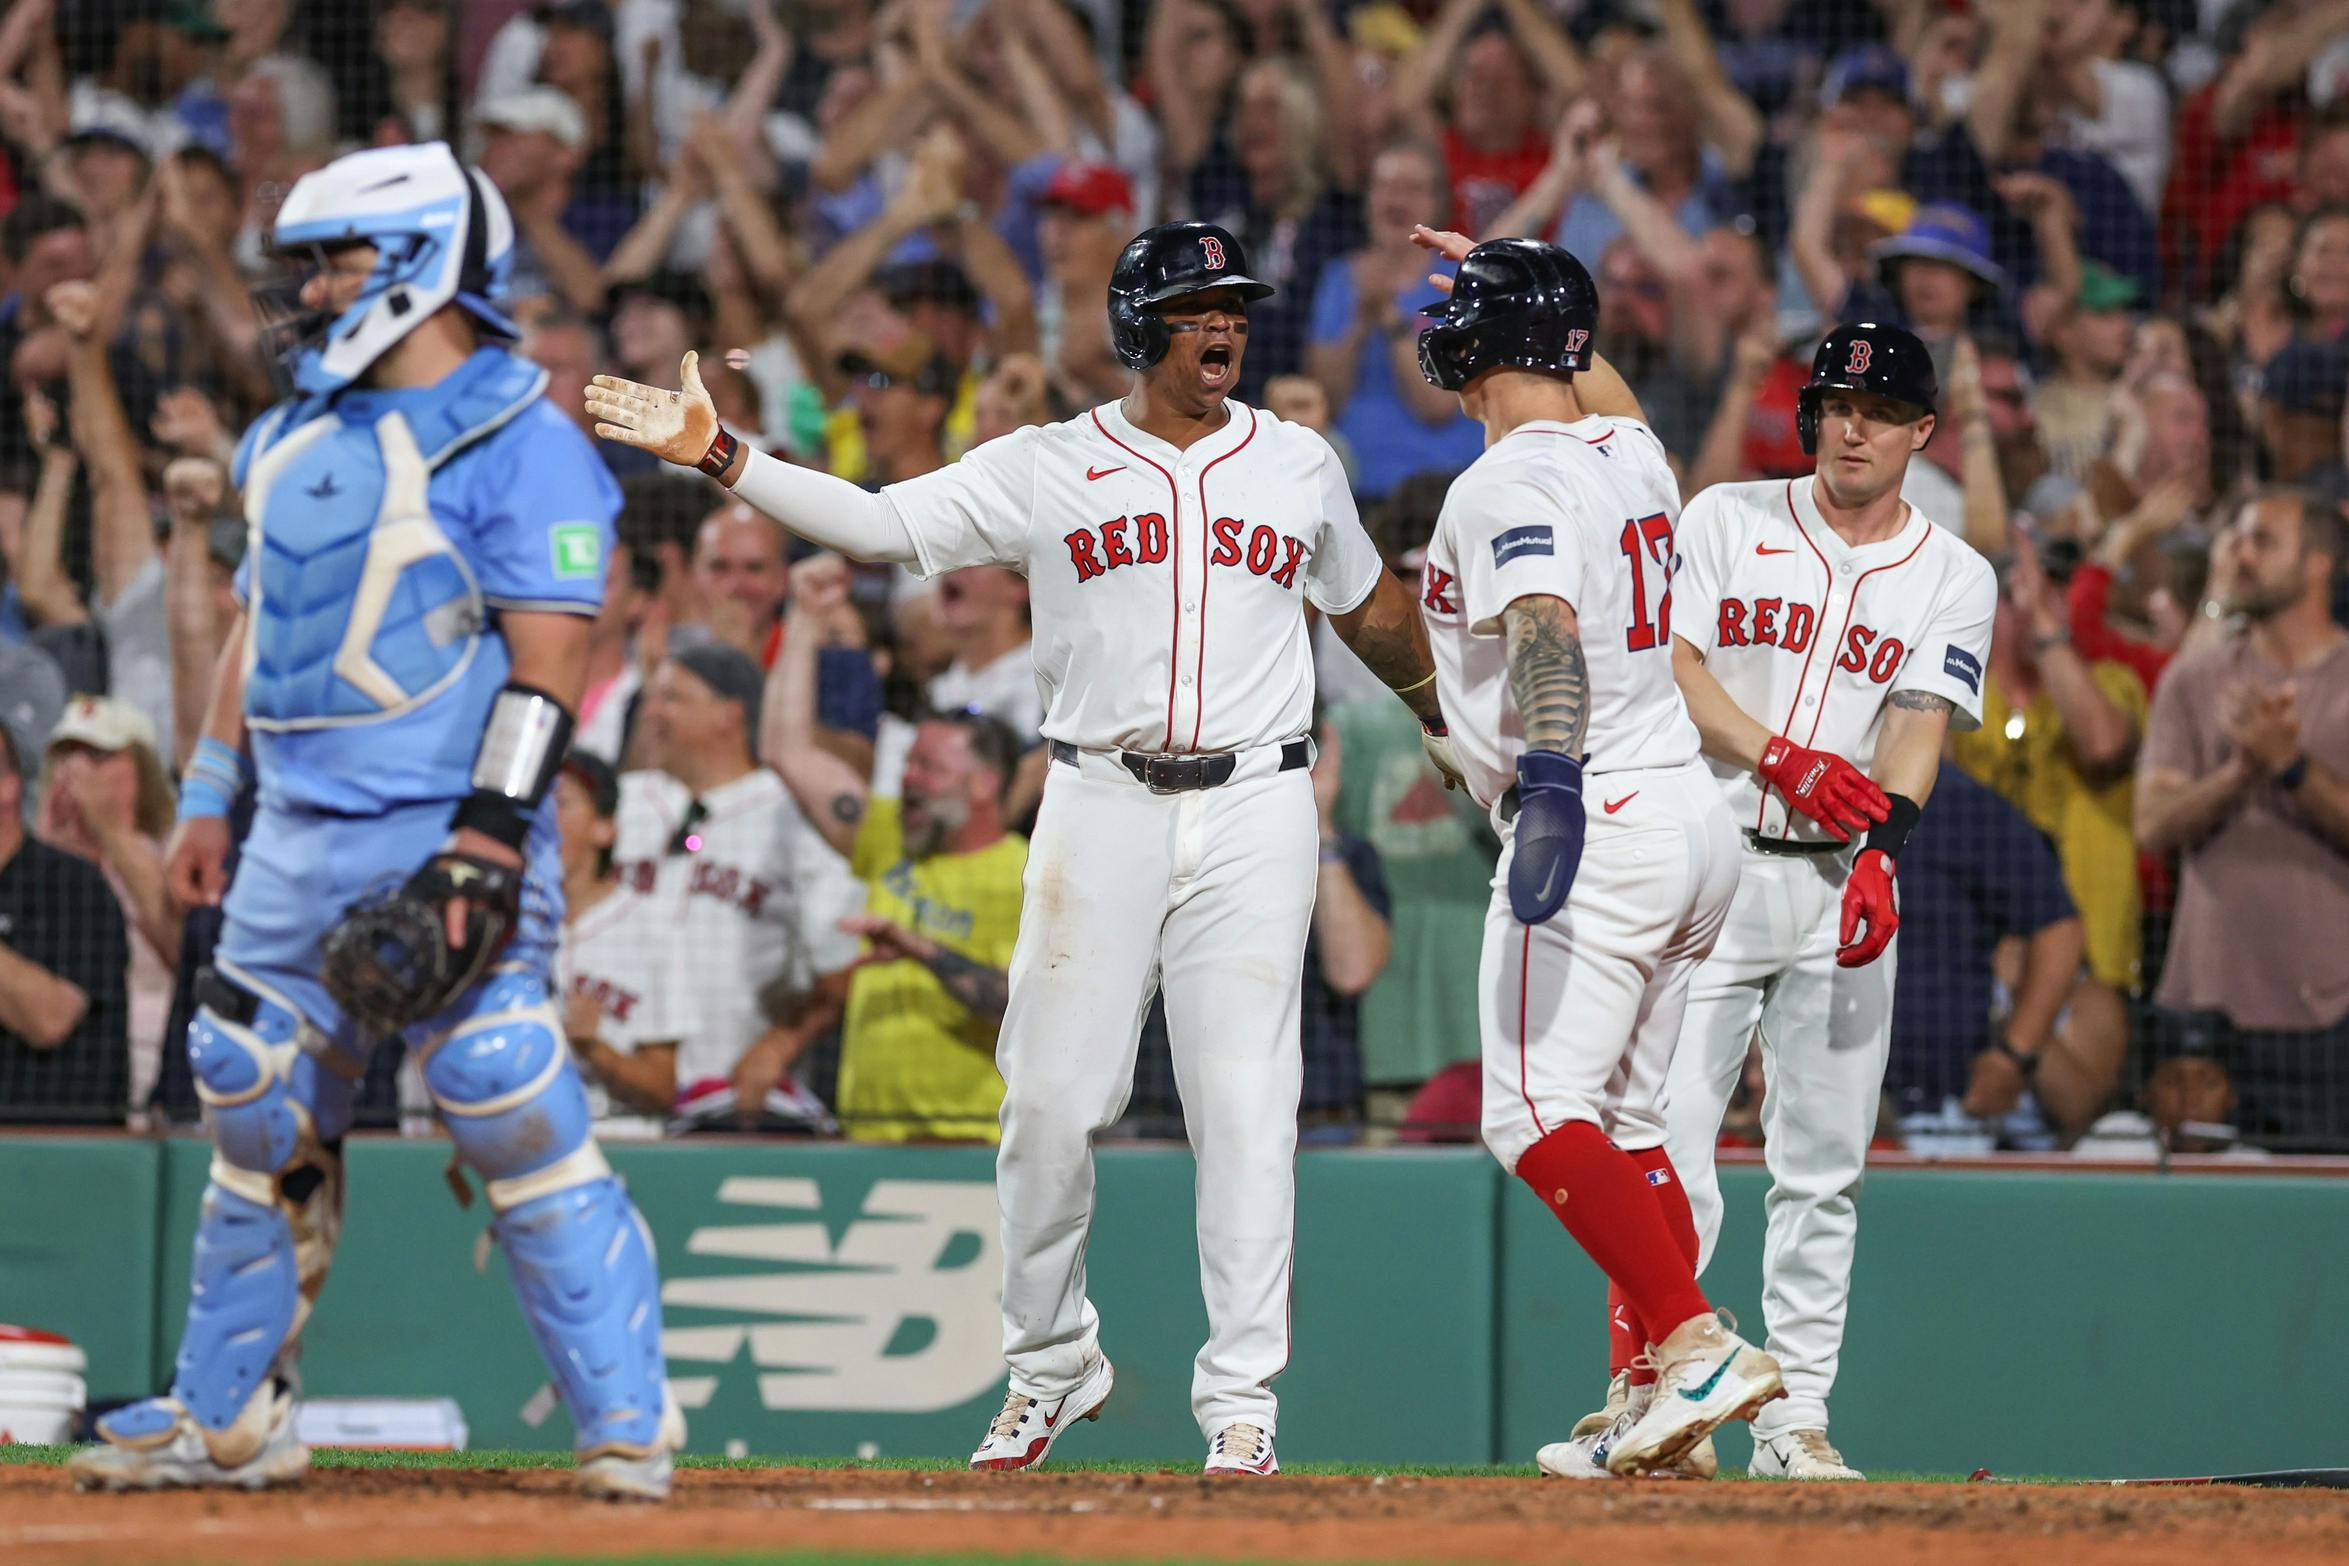 Boston Red Sox third baseman Rafael Devers (11) celebrates with Boston Red Sox right fielder Tyler O'Neill (17) after scoring during the eighth inning against the Toronto Blue Jays at Fenway Park.